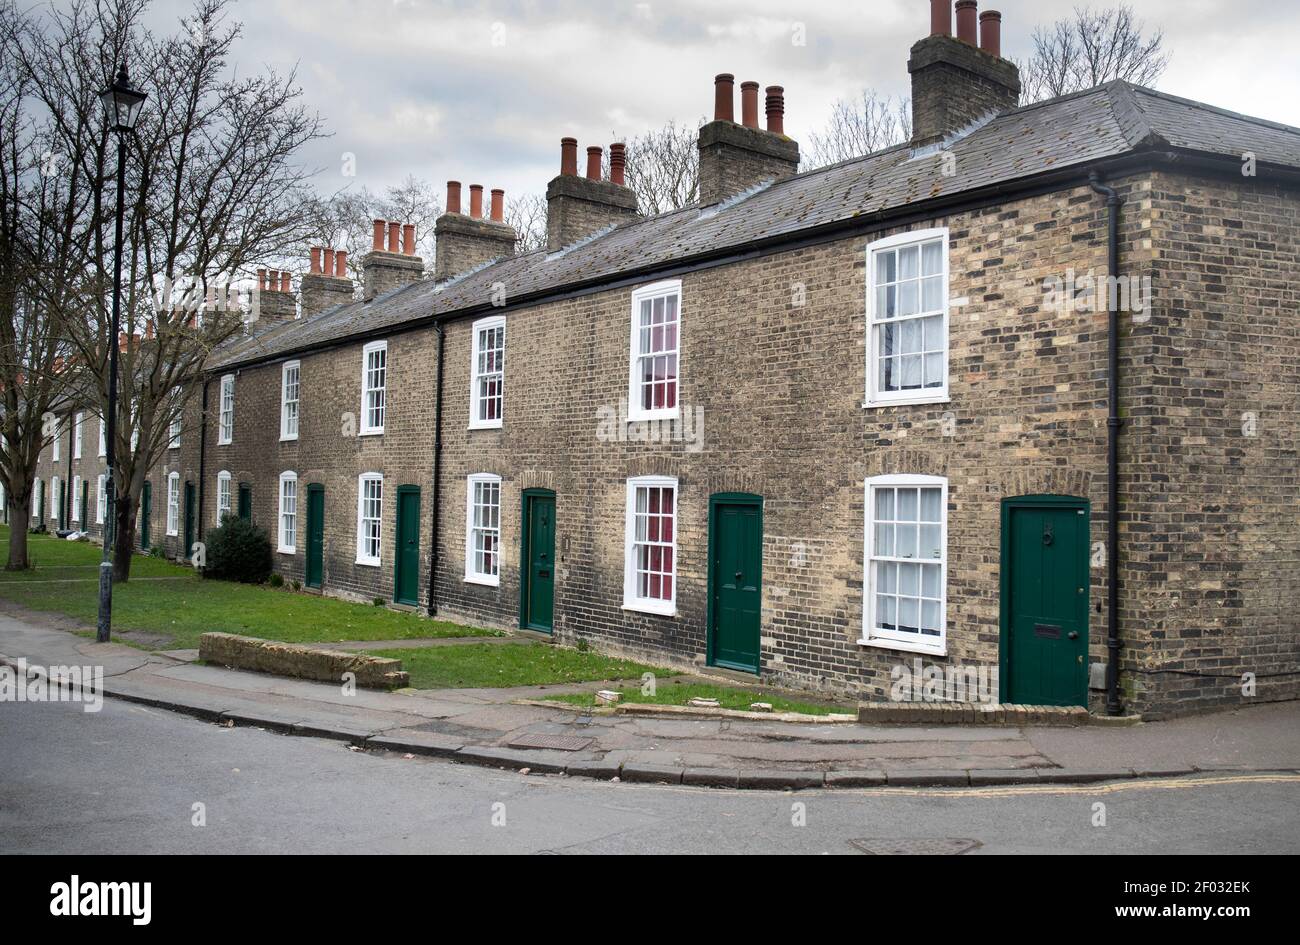 Terraced cottages in Cambridge, near Jesus Green Lower park Street. Stock Photo